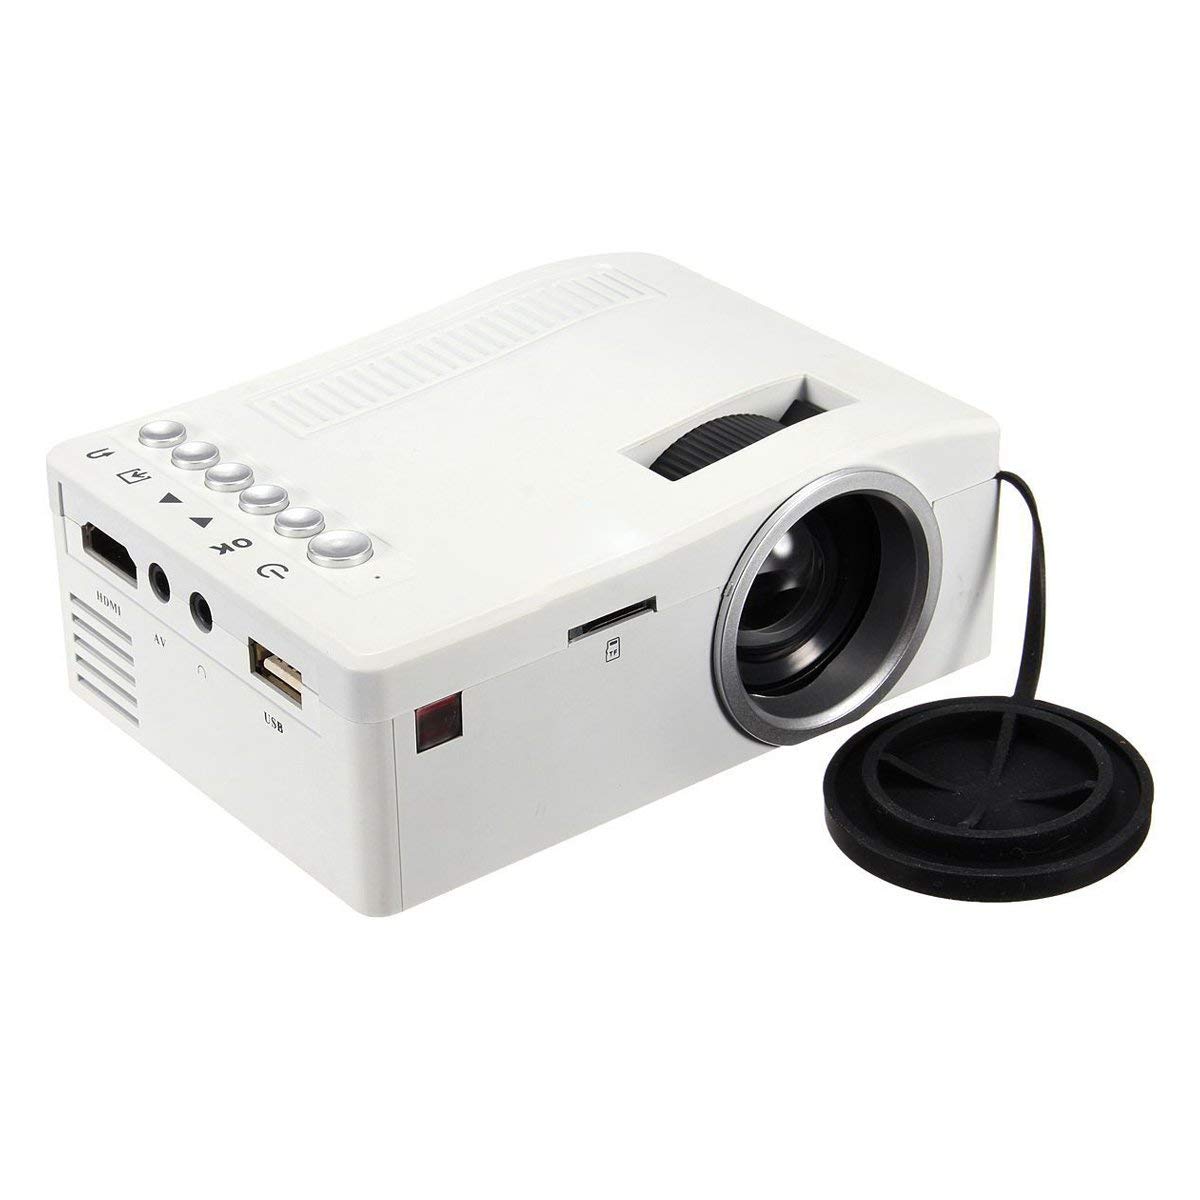 TooGoo Projector with various connection inputs like HDMI, VGA, USB etc.